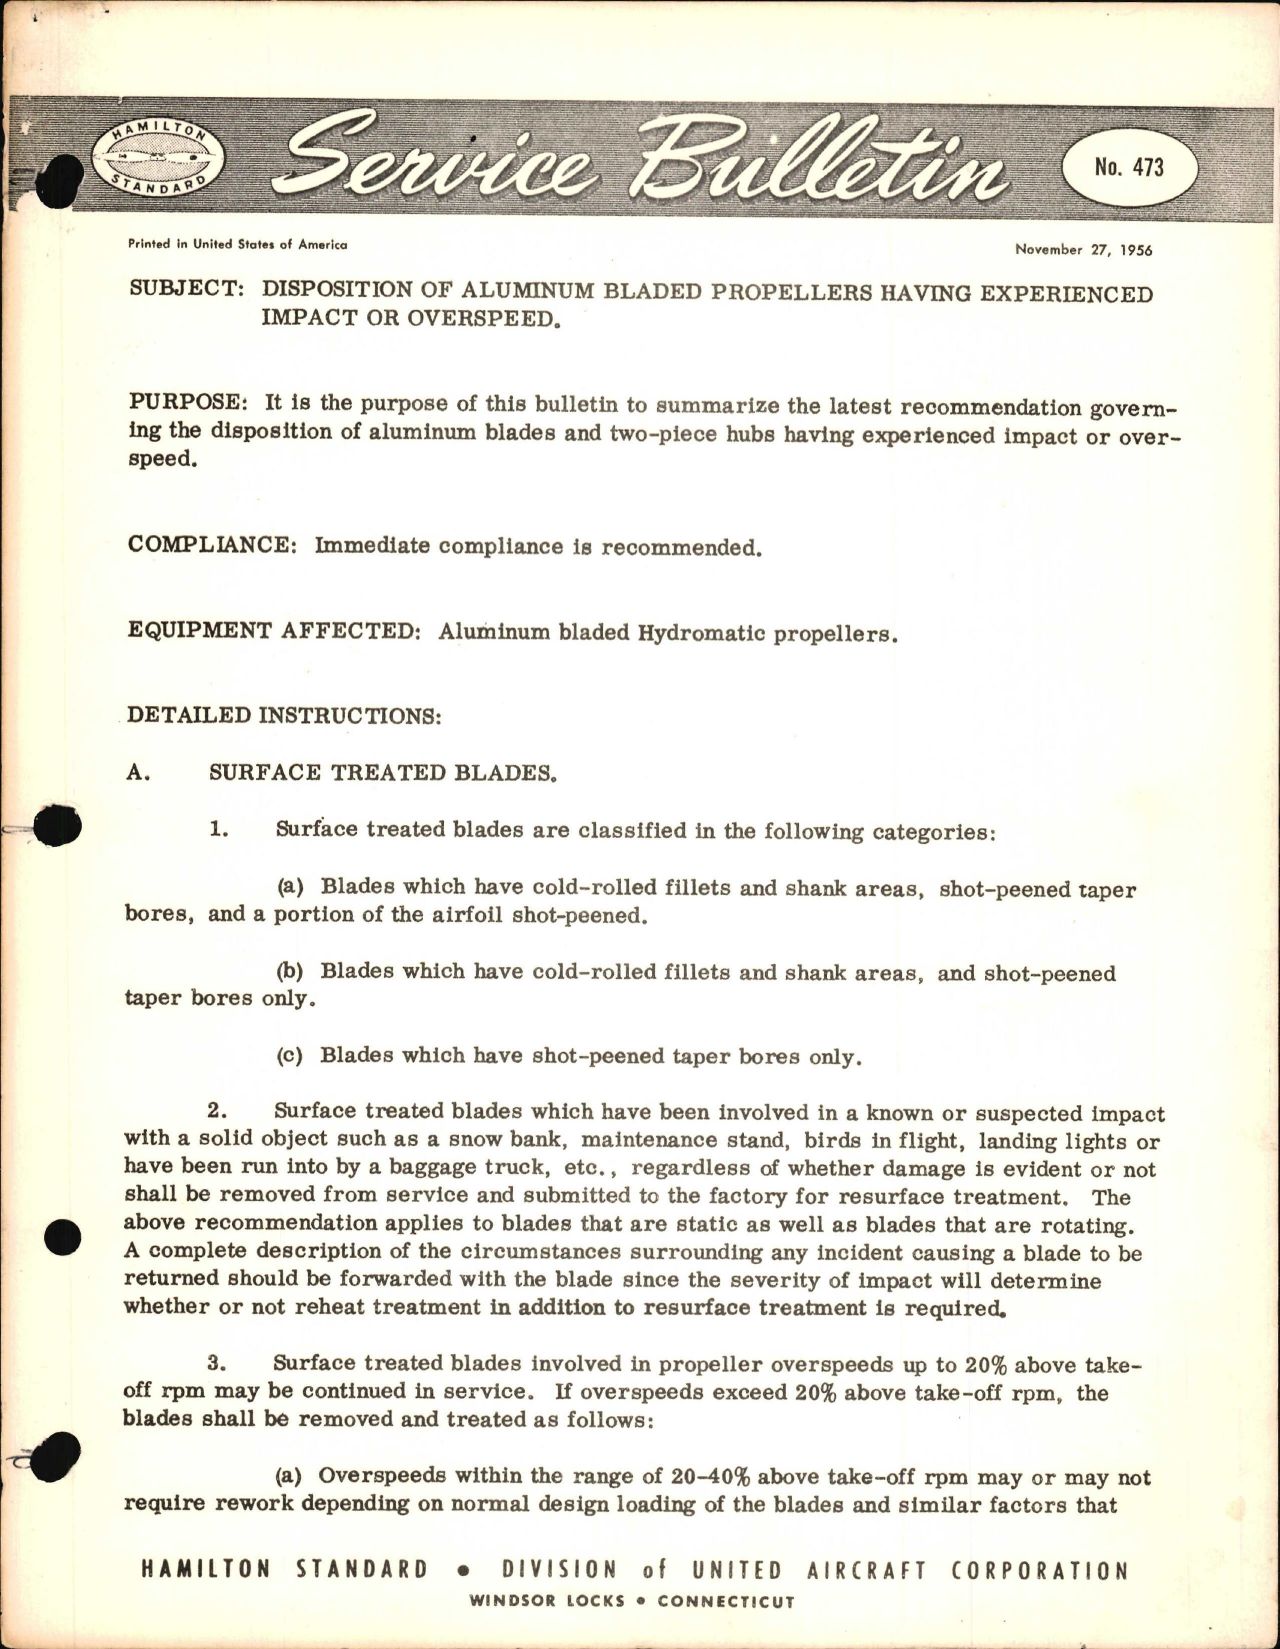 Sample page 1 from AirCorps Library document: Disposition of Aluminum Bladed Propellers Having Experienced Impact or Overspeed